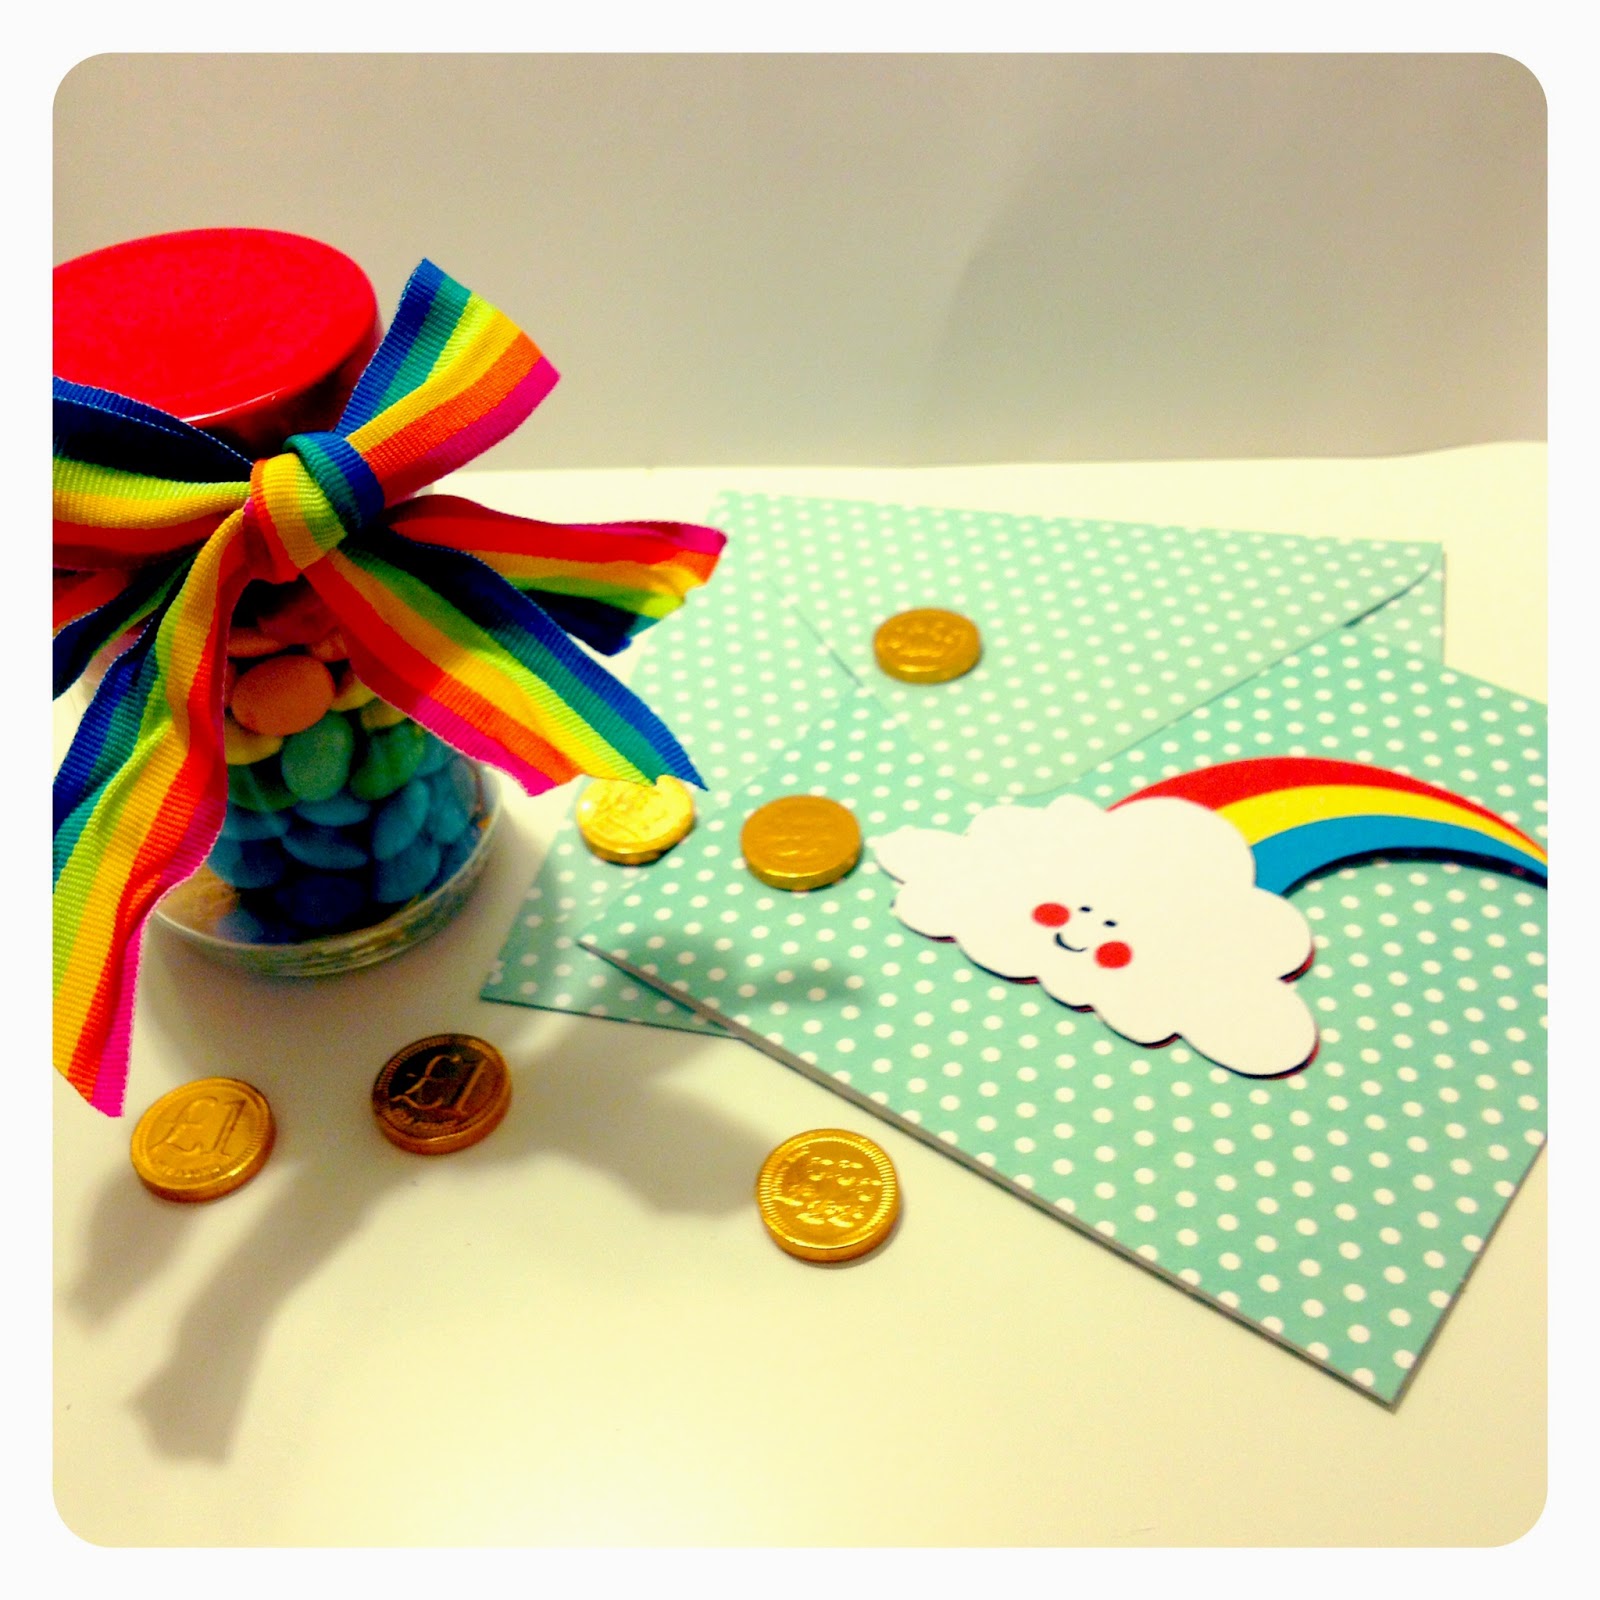 mamasVIB | V. I. BUYS: Brighten up your St Patrick's Day with these Rainbow buys…and quick DIY! Brighten up your St Patrick's Day with these Rainbow buys…| st patricks day | rainbow buys |fashion | bode |mothercare | DIY| mamasVIb | craft | celebrations | style | kids clothes |rainbow sweets |rainbow toys | patricks day | Irish | green |rainbow | party | smarties | Sainsburys wooden toy | rainbow bedding | baby buys | gift ideas |party favours | mamasVIB | stylist | fashion editor| 